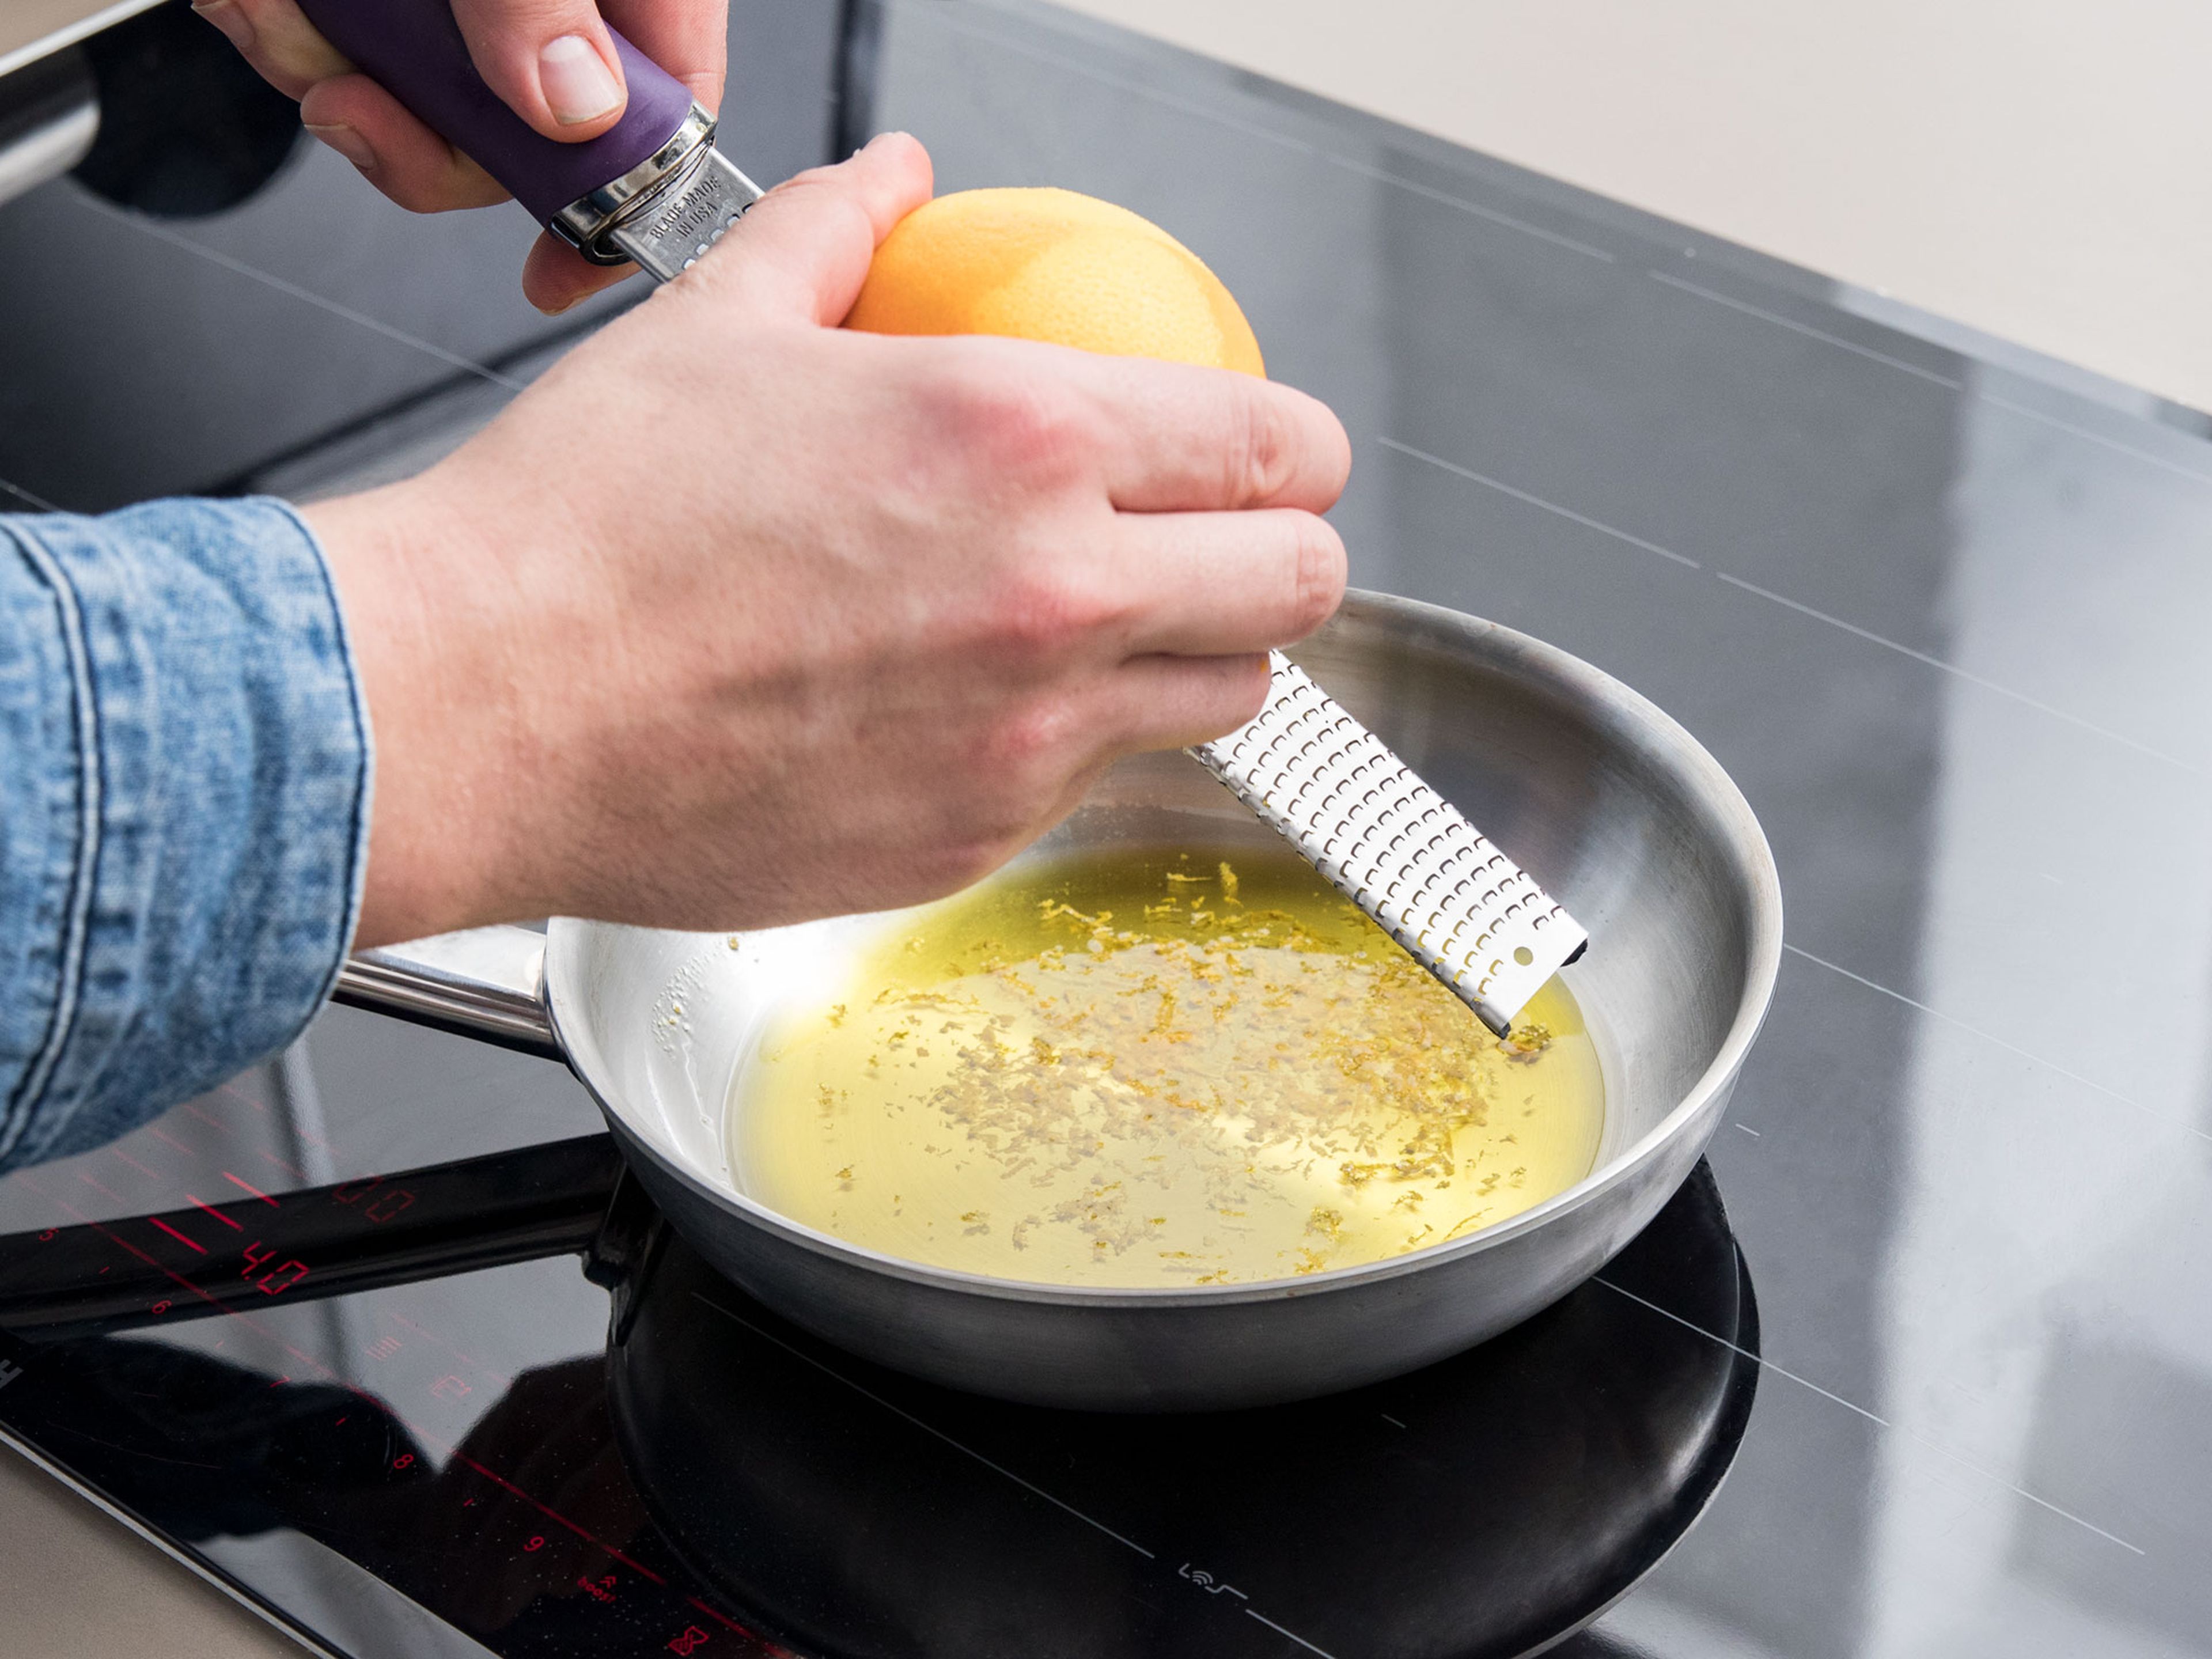 Preheat the oven to 230°C/450°F. Heat olive oil in a small frying pan. Zest another orange into the frying pan and let simmer to infuse its flavor.